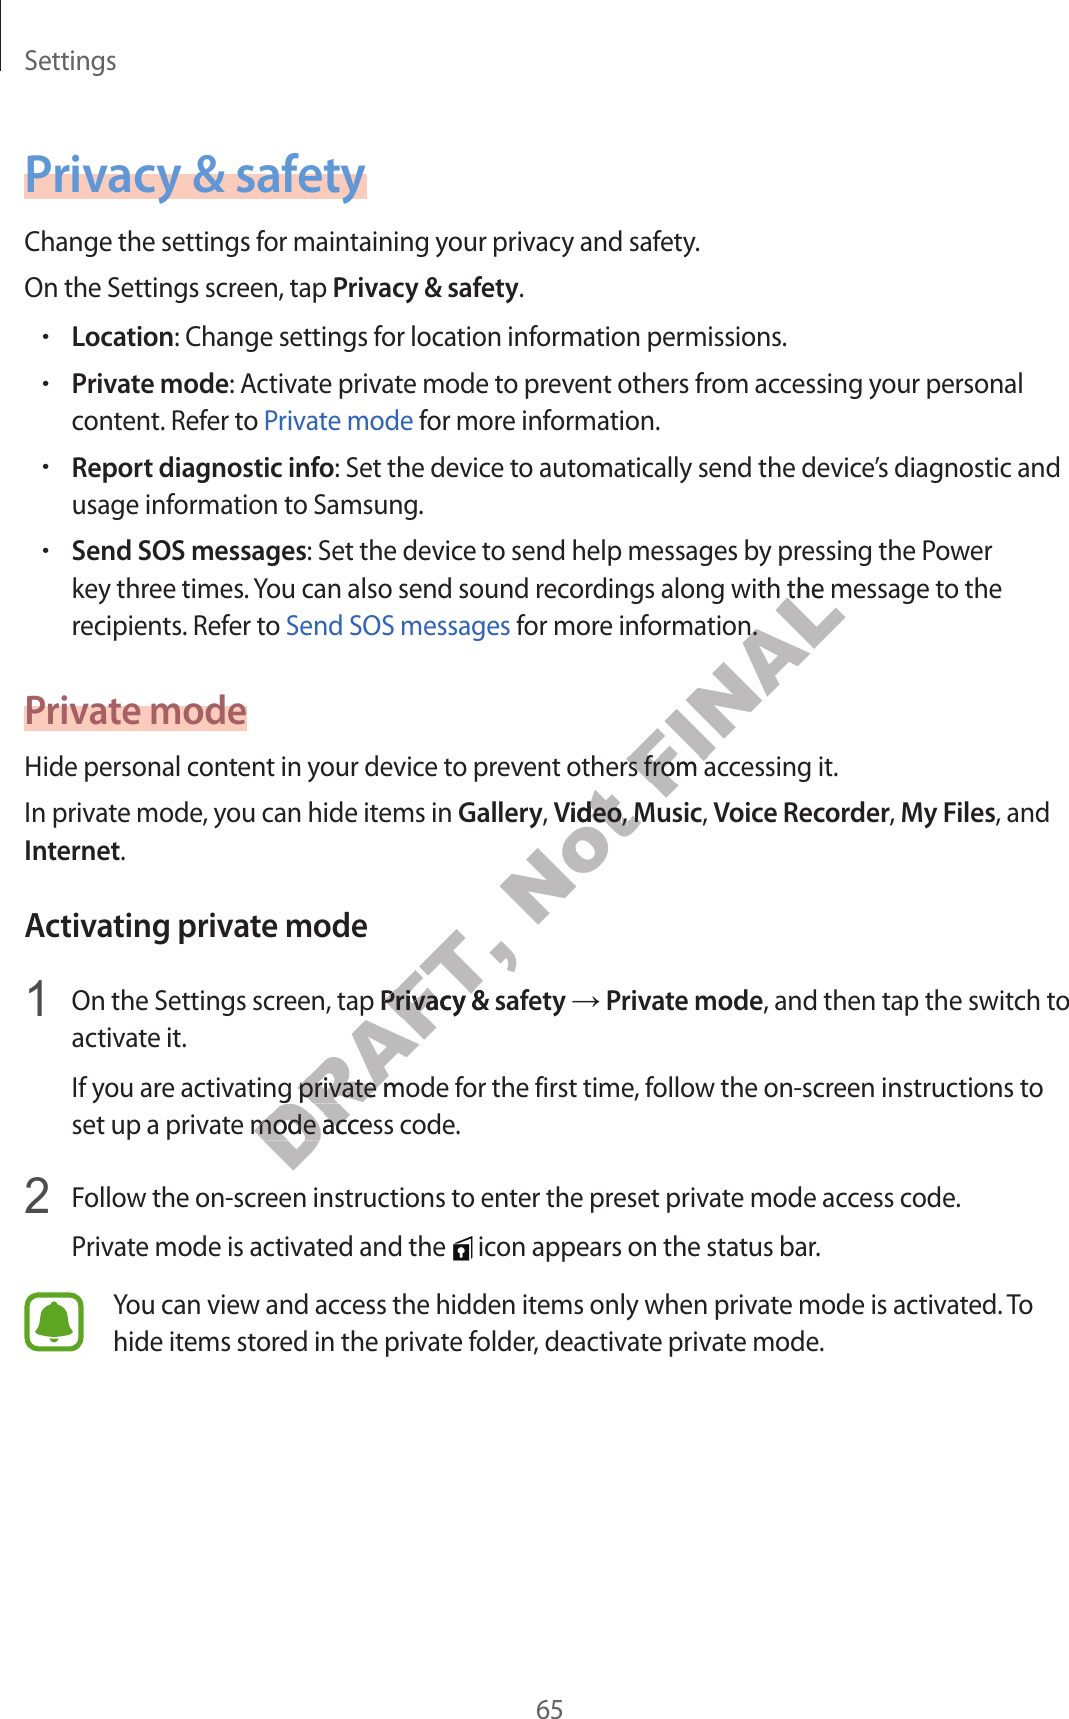 Settings65P rivacy &amp; safetyChange the settings for maintaining y our privacy and safety.On the Settings screen, tap Priv acy &amp; safety.•Location: Change settings for location information permissions.•Priv at e mode: Activate privat e mode t o pr ev ent others fr om ac cessing y our personal conten t. Ref er t o P riva te mode f or mor e information.•Report diagnostic info: Set the device to automatically send the devic e’s diagnostic and usage information t o Samsung .•Send SOS messages: Set the device to send help messages by pr essing the Power key three times . You can also send sound recordings along with the message t o the recipients . Ref er t o Send SOS messages for mor e information.Priv a te modeHide personal content in y our device t o pr ev ent others fr om ac c essing it.In private mode, y ou can hide it ems in Gallery, Video, Music, Voice Recorder, My F iles, and Internet.Activating priv at e mode1  On the Settings screen, tap Priv acy &amp; safety → Priv at e mode, and then tap the switch to activate it.If you are activating private mode for the first time, follow the on-scr een instructions to set up a private mode acc ess c ode .2  Follow the on-screen instructions to enter the preset priva te mode ac c ess code .Priva te mode is activated and the   icon appears on the status bar.You can view and access the hidden items only when private mode is activated . To hide items stor ed in the privat e f older, deactivate private mode .DRAFT, On the Settings screen, tap DRAFT, On the Settings screen, tap Priv acy &amp; safetyDRAFT, Priv acy &amp; safetyDRAFT, If you are activating private mode for the first time, follow the on-scr een instructions to DRAFT, If you are activating private mode for the first time, follow the on-scr een instructions to set up a private mode acc ess c ode .DRAFT, set up a private mode acc ess c ode .Not Hide personal content in y our device t o pr ev ent others fr om ac c essing it.Not Hide personal content in y our device t o pr ev ent others fr om ac c essing it.VideoNot Video, Not , MusicNot MusicFINALkey three times . You can also send sound recordings along with the message t o the FINALkey three times . You can also send sound recordings along with the message t o the  for mor e inf ormation.FINAL for mor e inf ormation.Hide personal content in y our device t o pr ev ent others fr om ac c essing it.FINALHide personal content in y our device t o pr ev ent others fr om ac c essing it.